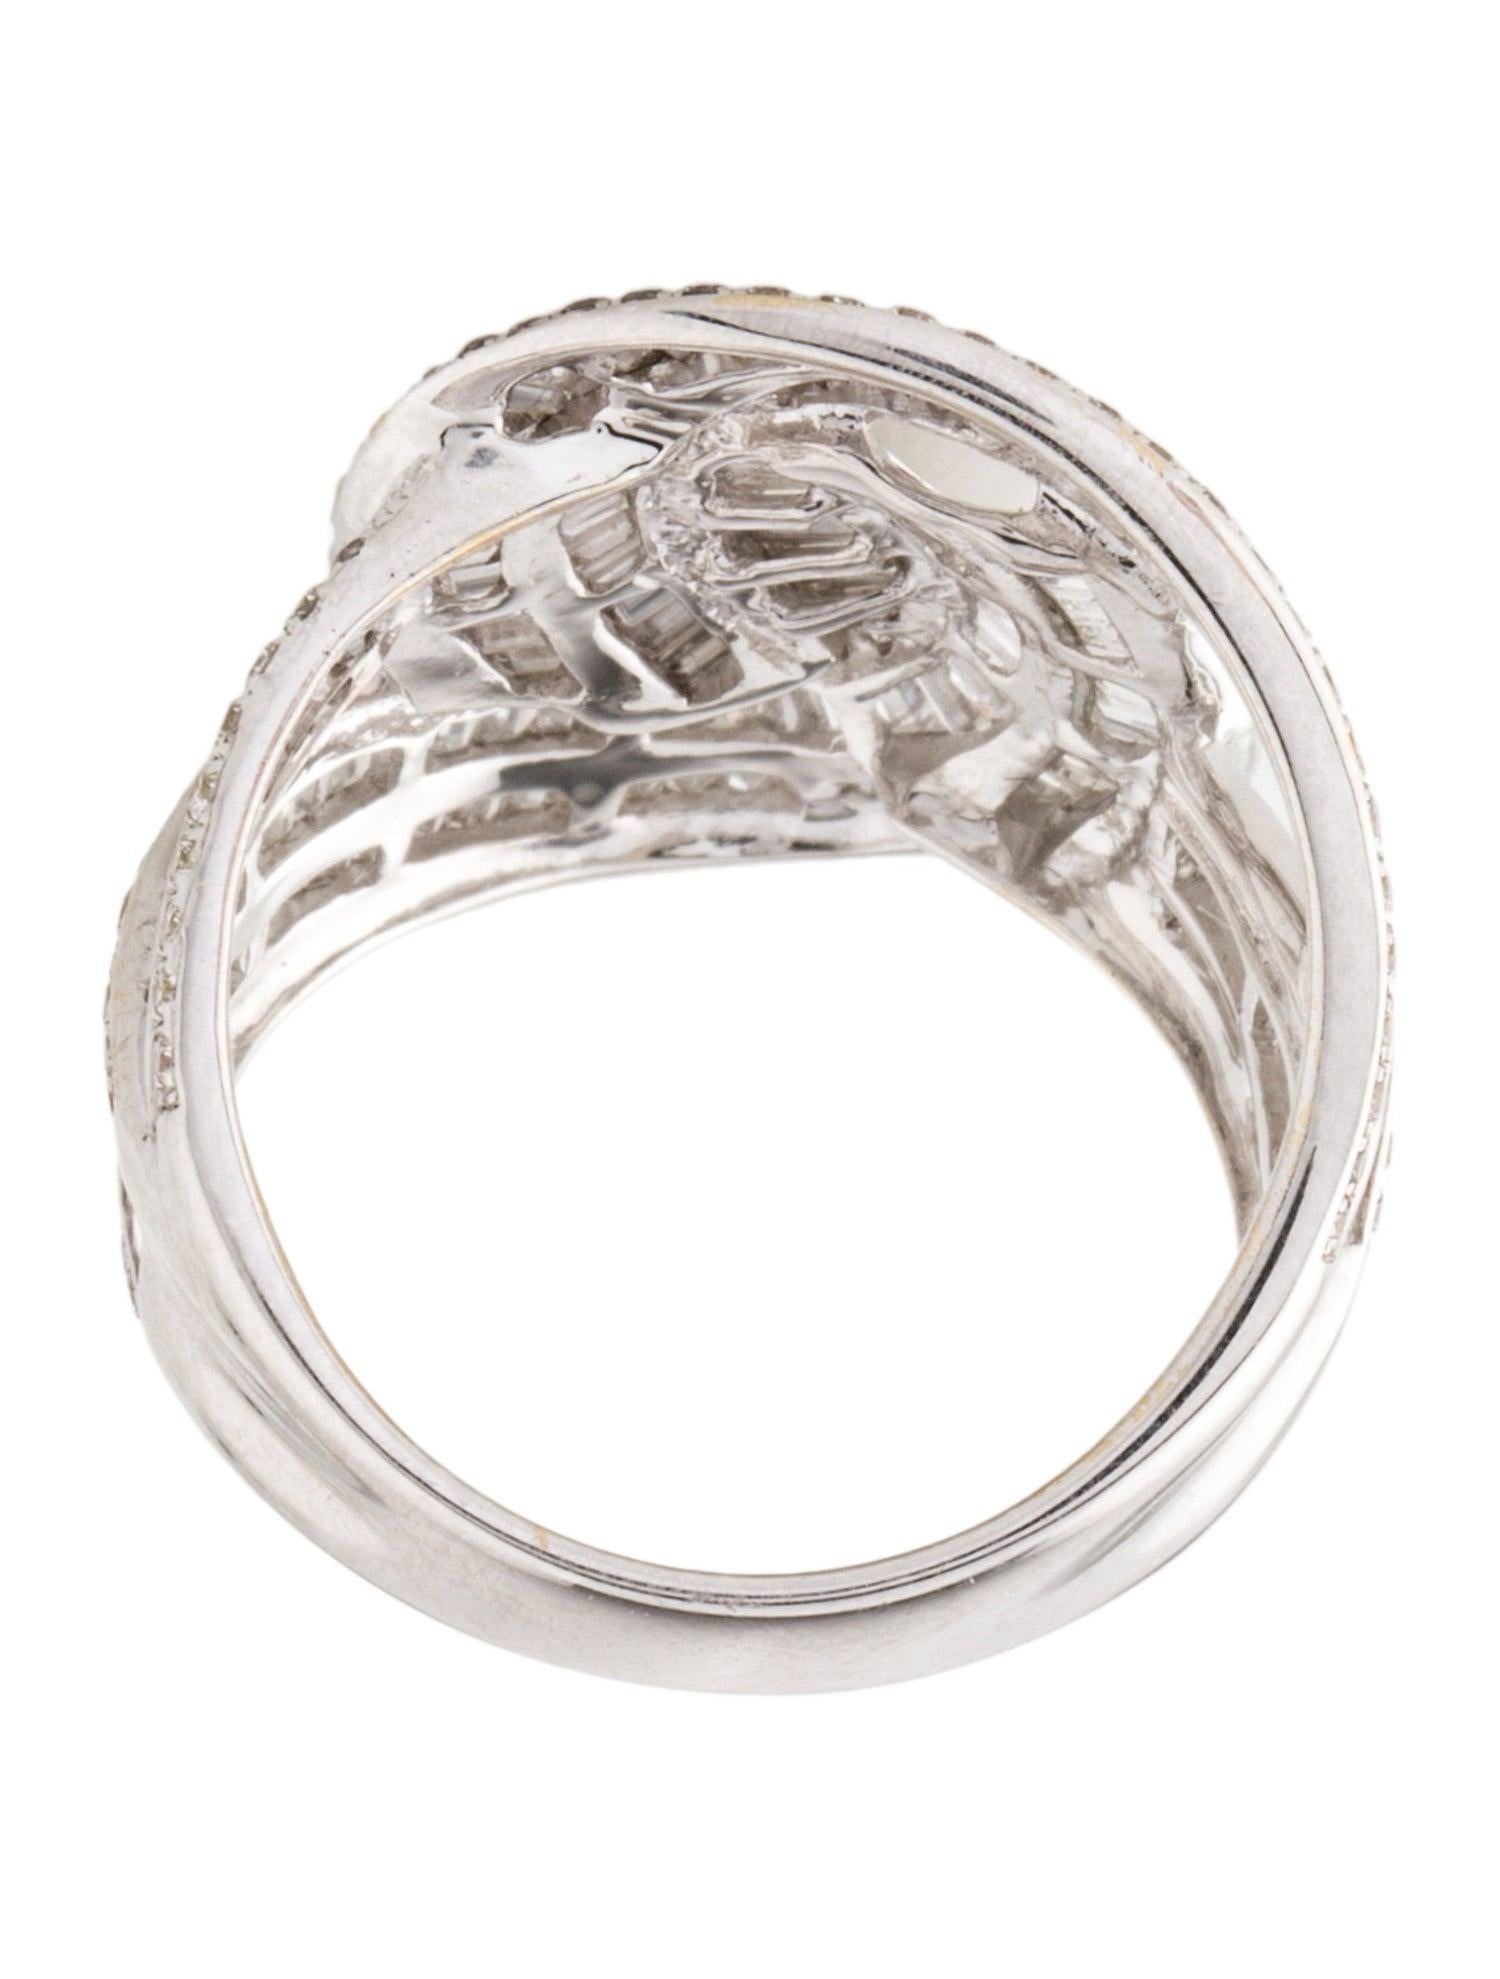 Luxurious 18K White Gold Diamond Cocktail Ring, 2.46ctw, Round & Baguette Cut For Sale 1